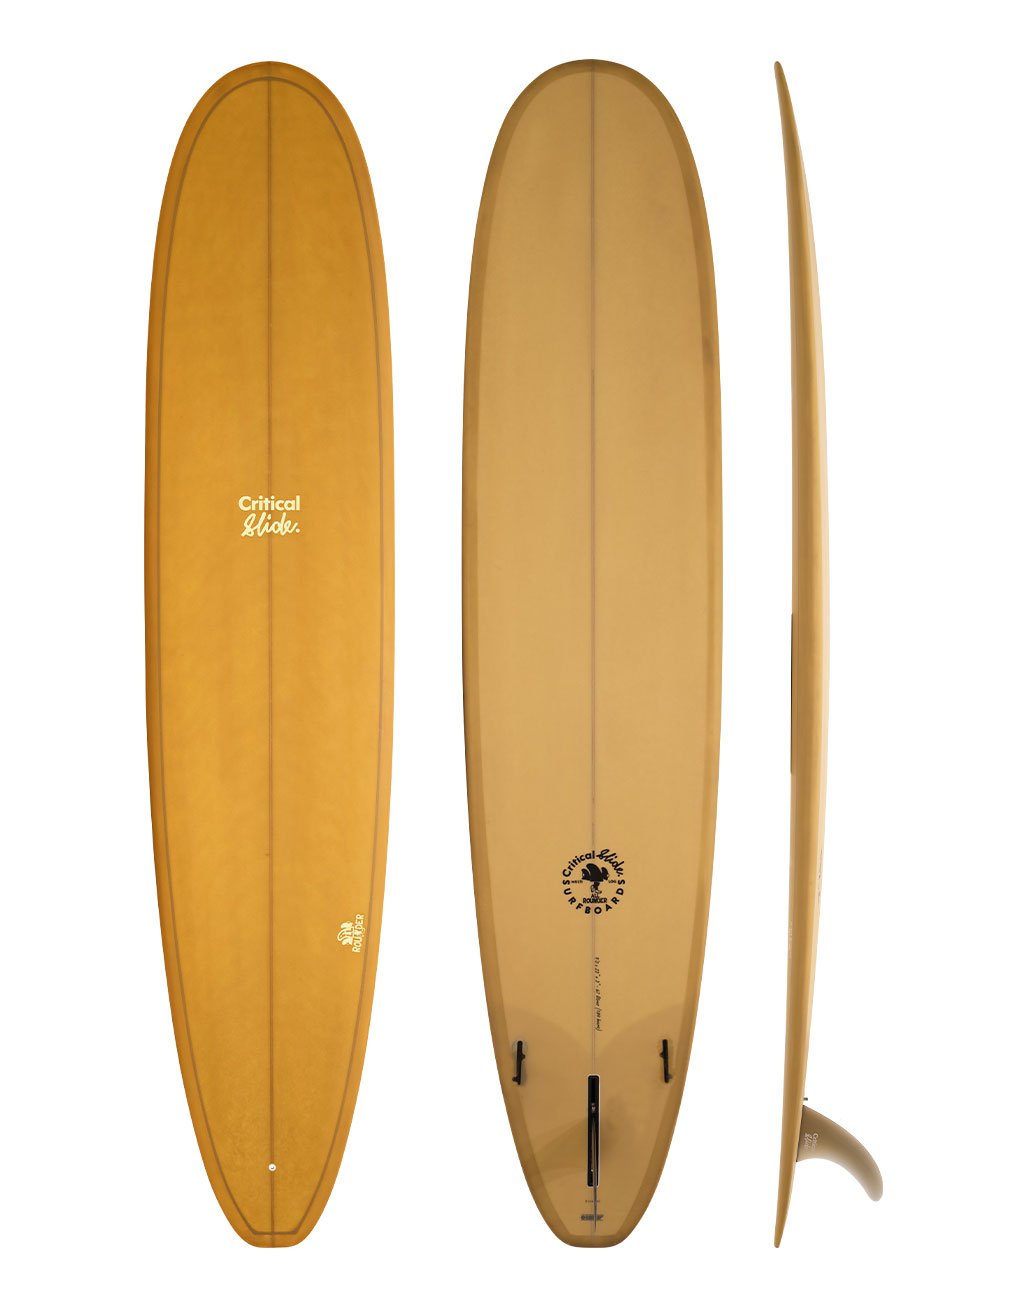 The Critical Slide Society Surfboards All Rounder - straw yellow colored longboard